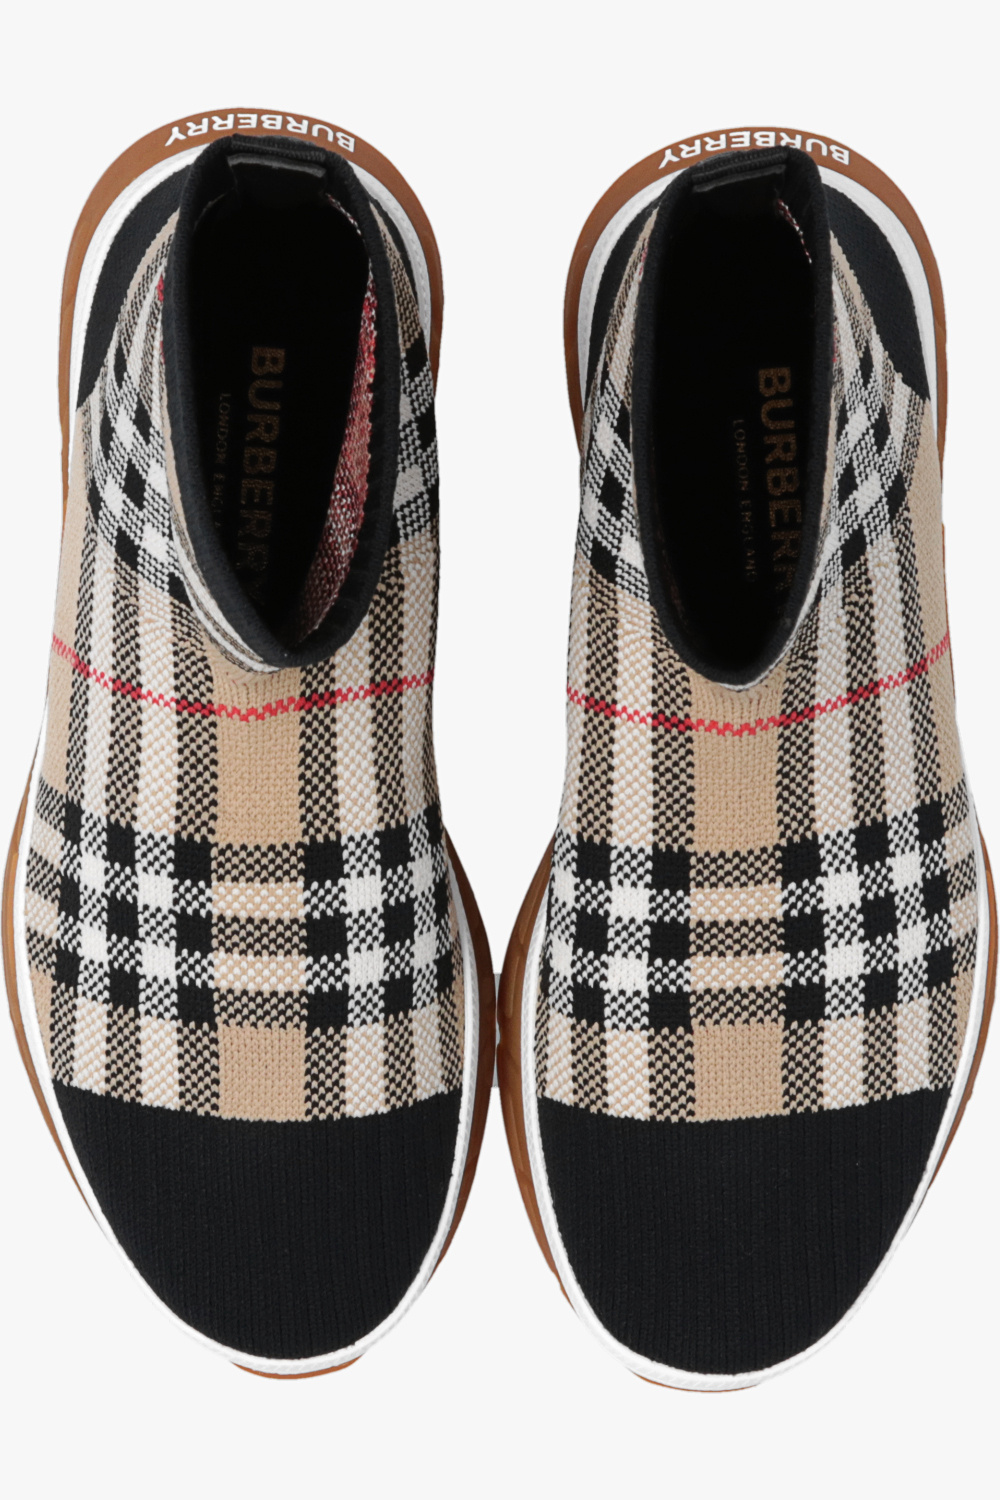 burberry checked Kids Sock sneakers